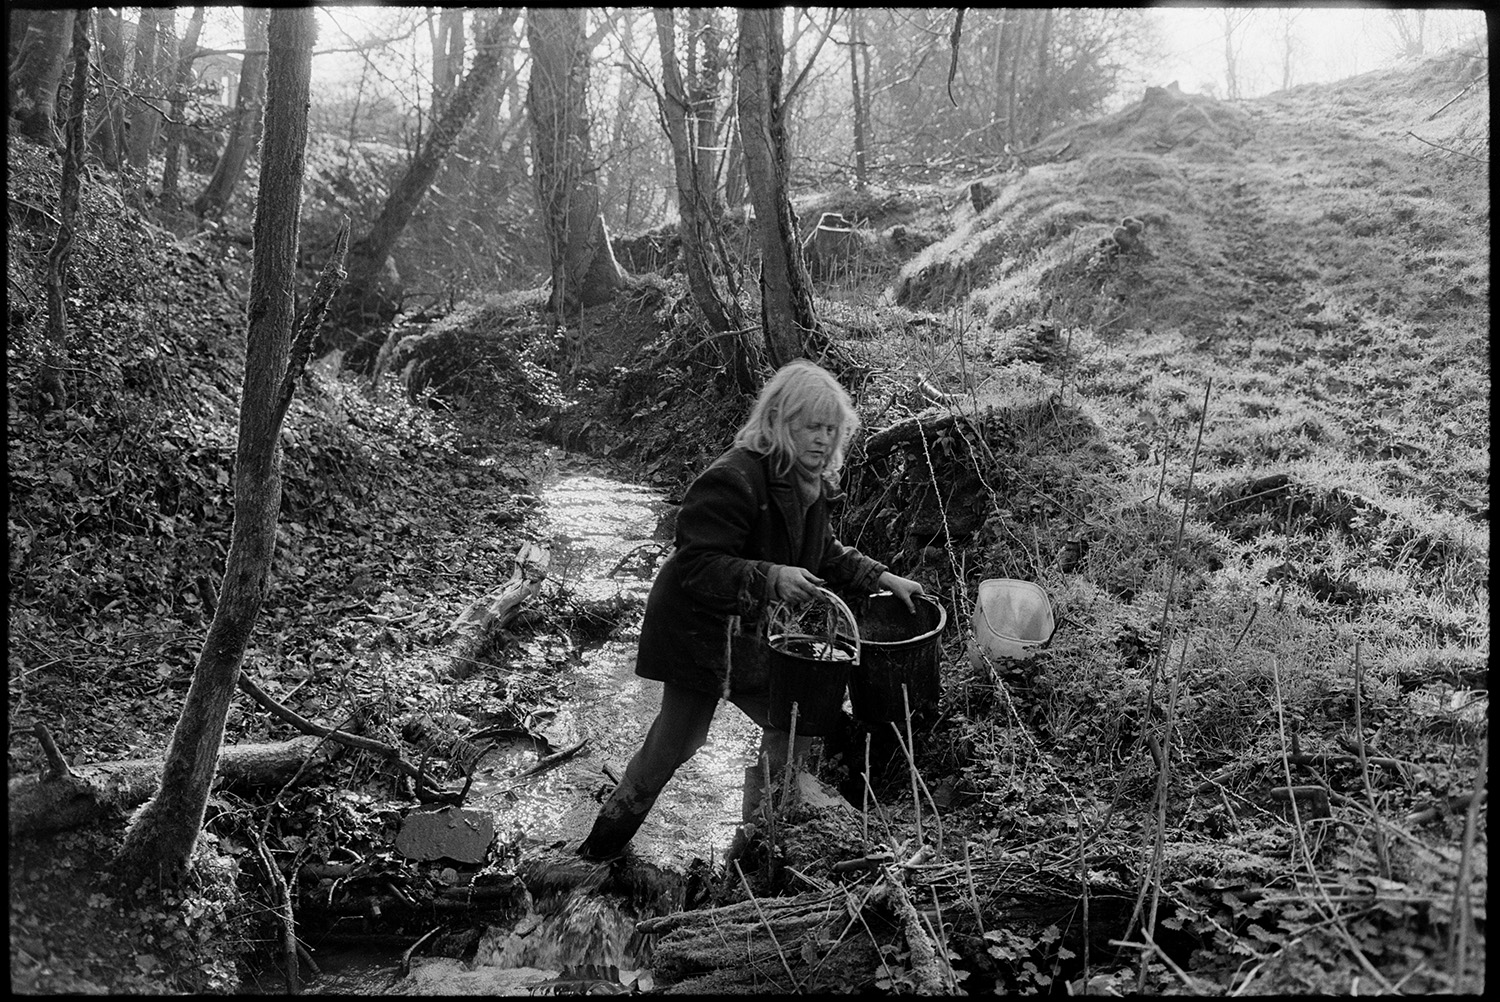 Woman farmer milking goat and fetching water from stream, old car in mud.
[Jo Curzon collecting water with plastic buckets, from a stream in a wooded valley at Millhams, Dolton.]